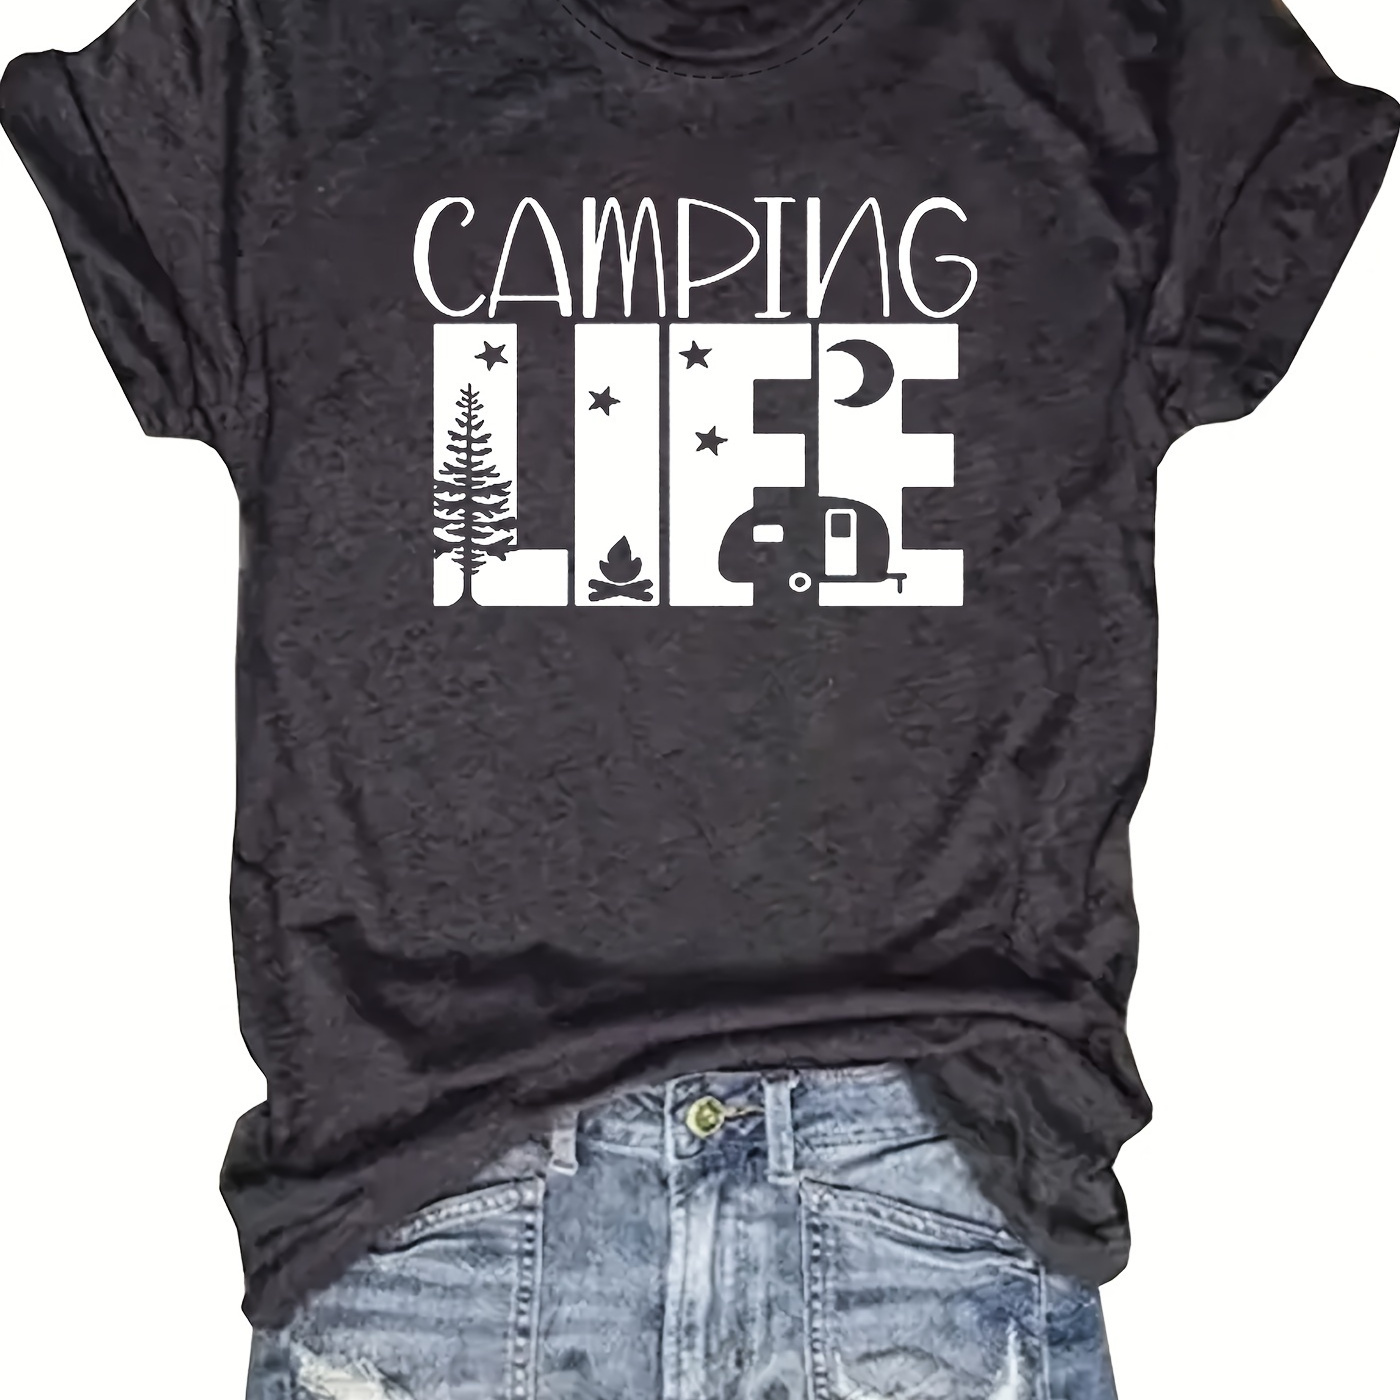 

Camping Life Print T-shirt, Casual Crew Neck Short Sleeve Top For Spring & Summer, Women's Clothing